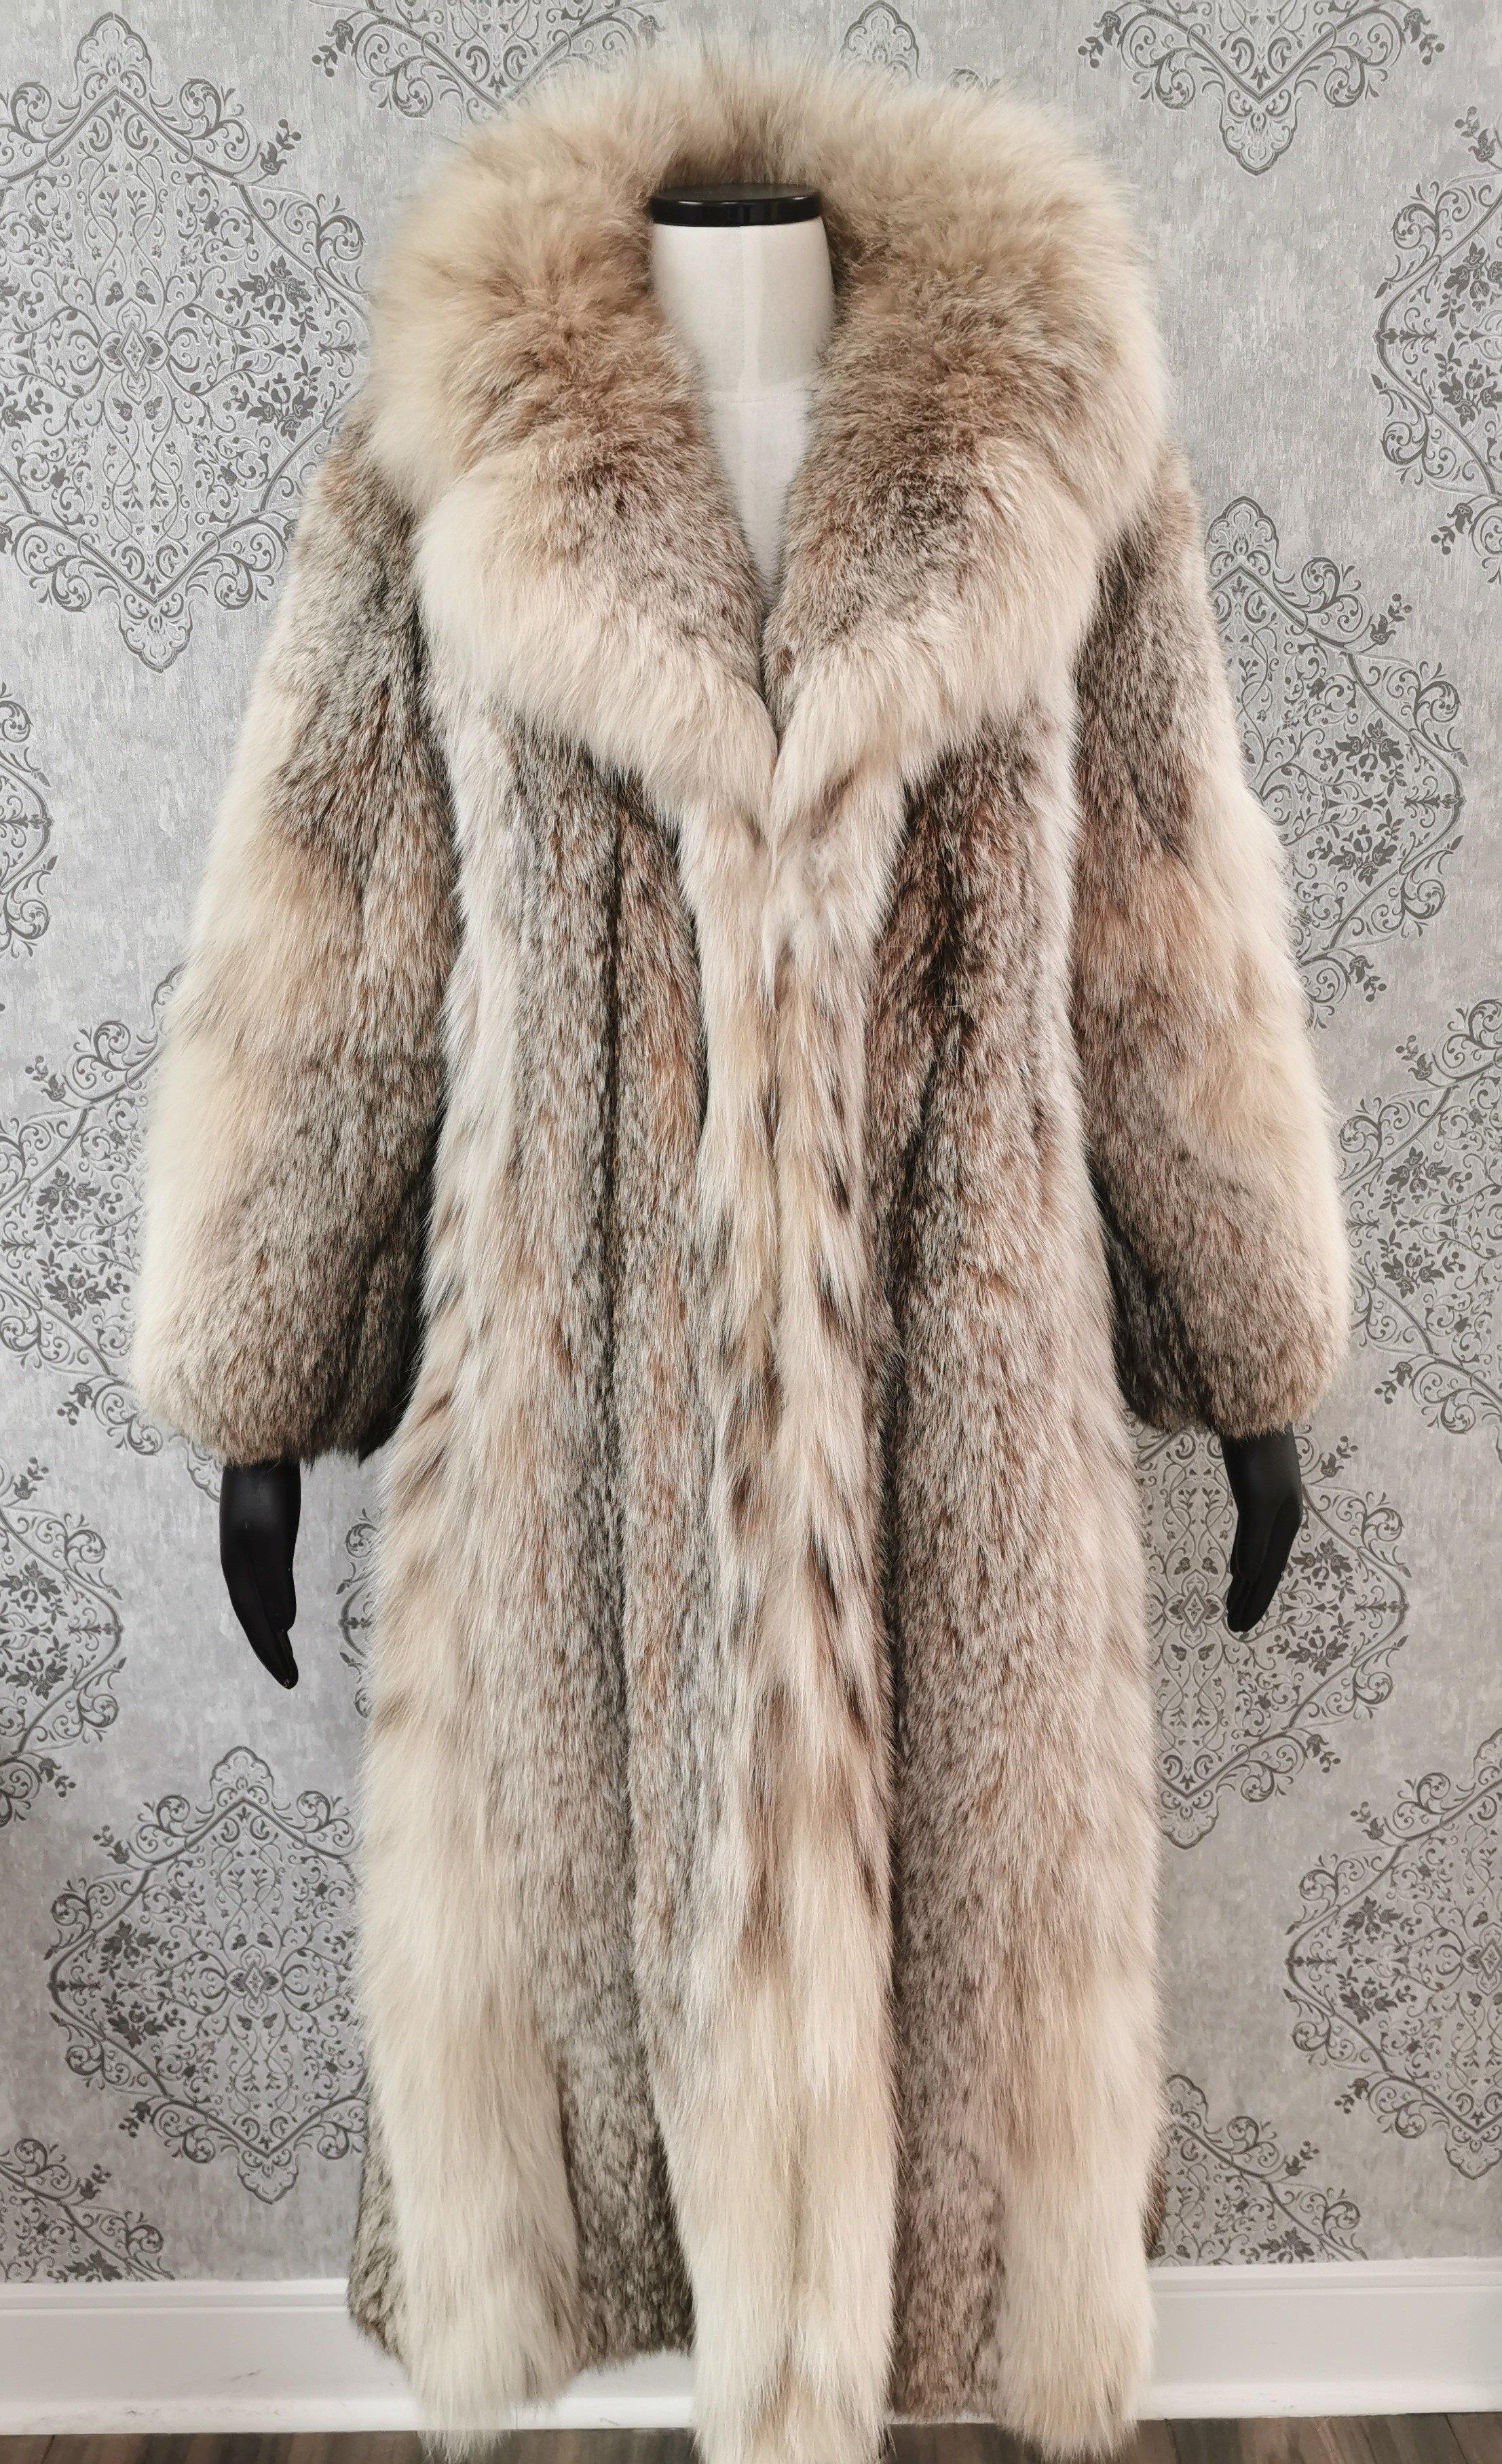 Brand new Canadian Lynx Fur Coat (Size 12 Medium) in good condition

Elegant portrait collar, straight sleeves, two side seam pockets and white satin lining

Made - USA

Measurements
-Length 48''
-Back across 20''
-Sleeves 27-24''
-Bust: 48
-Inside